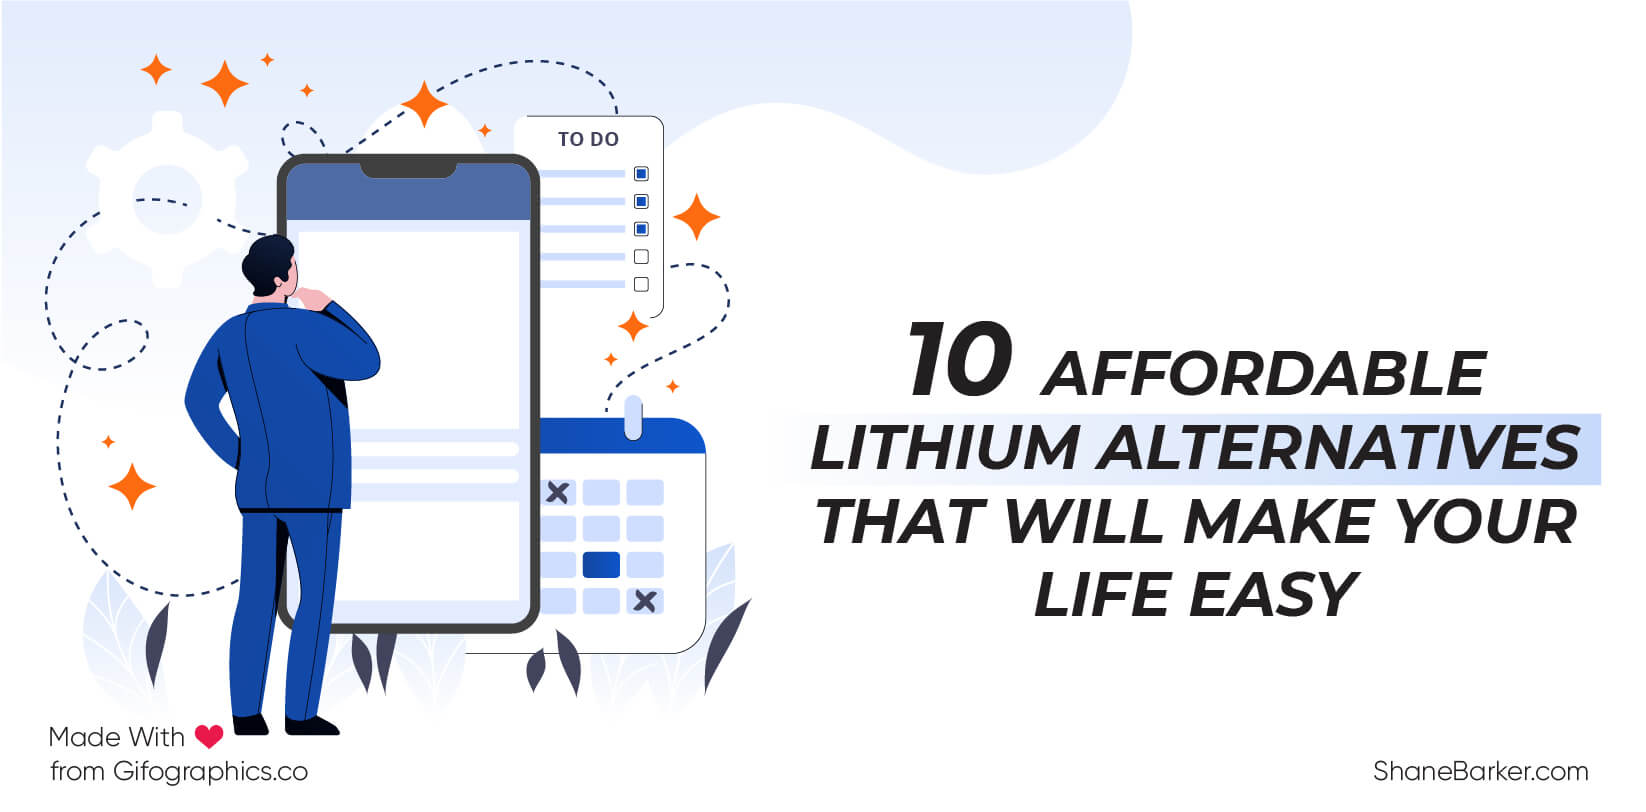 Ten Affordable Lithium Alternatives That Will Make Your Life Easy